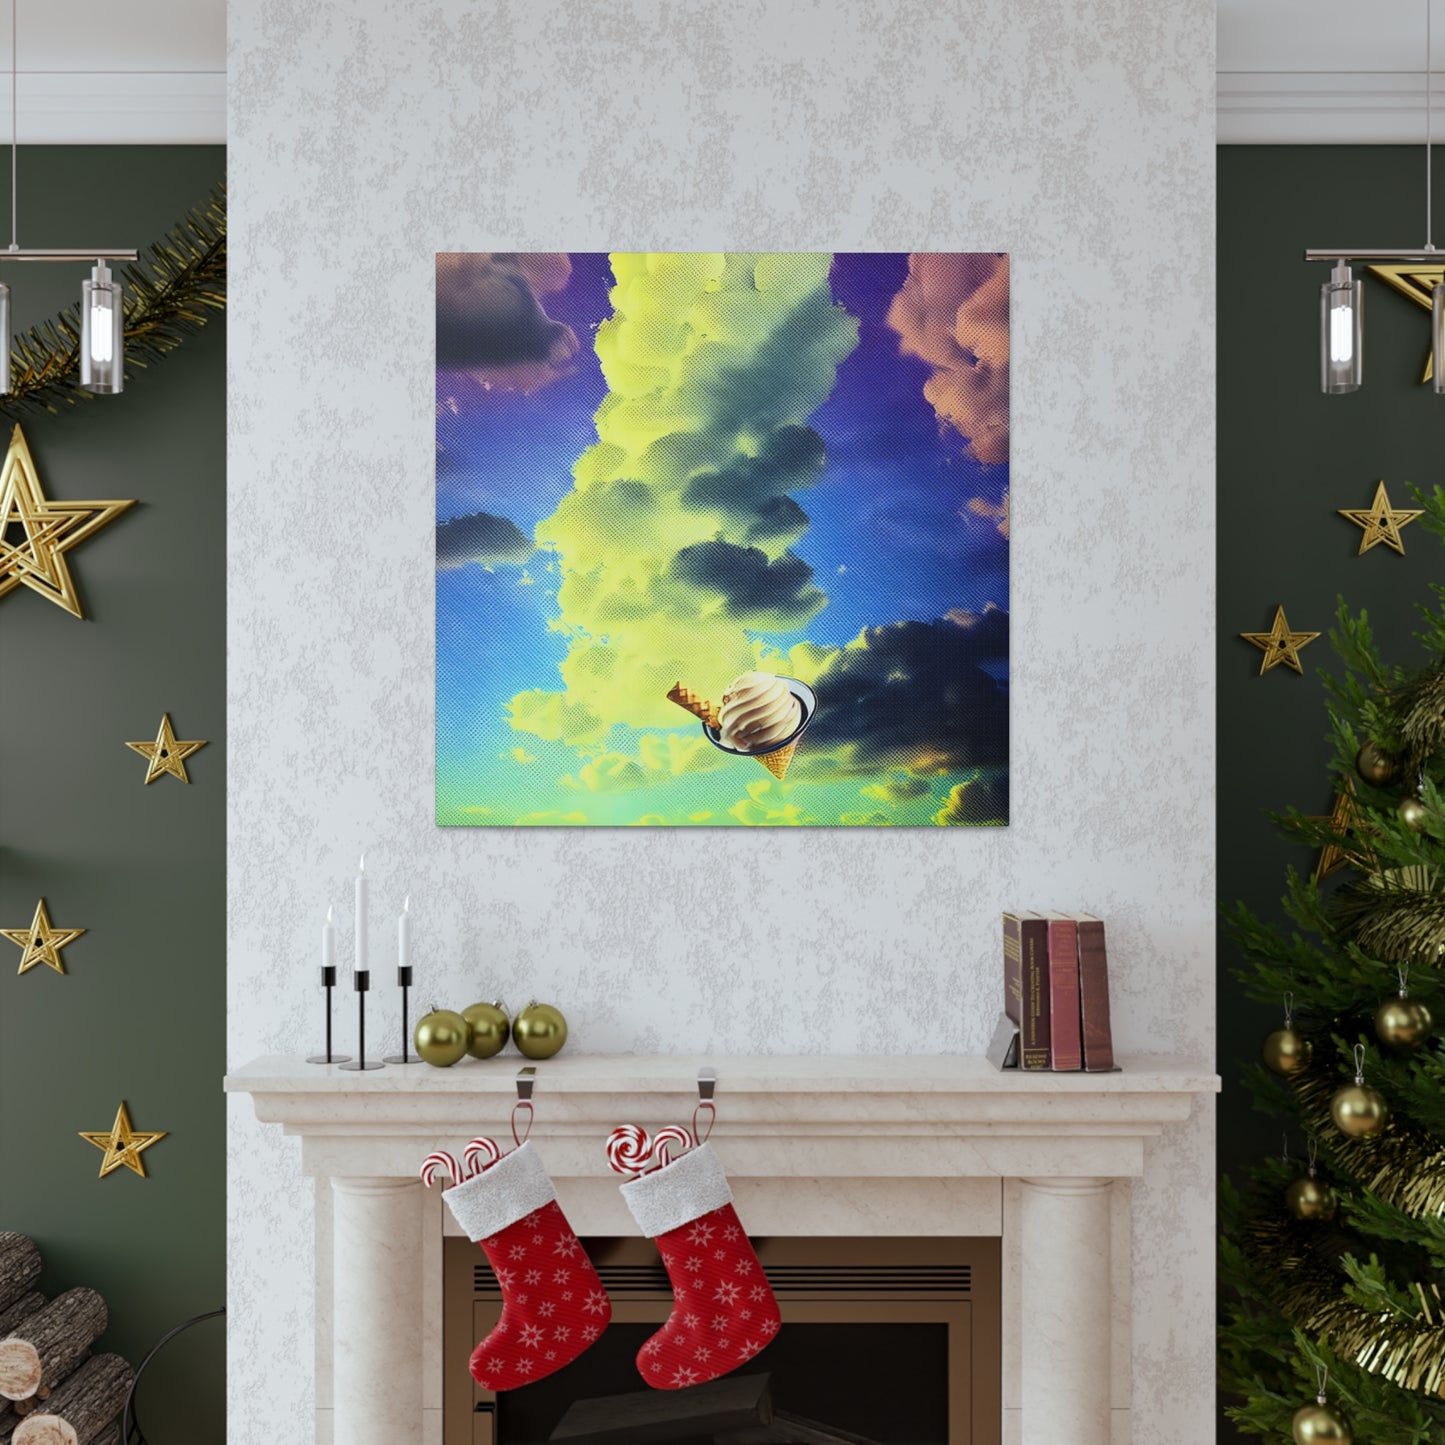 Ice Cream In The Clouds 03 - Gallery Canvas